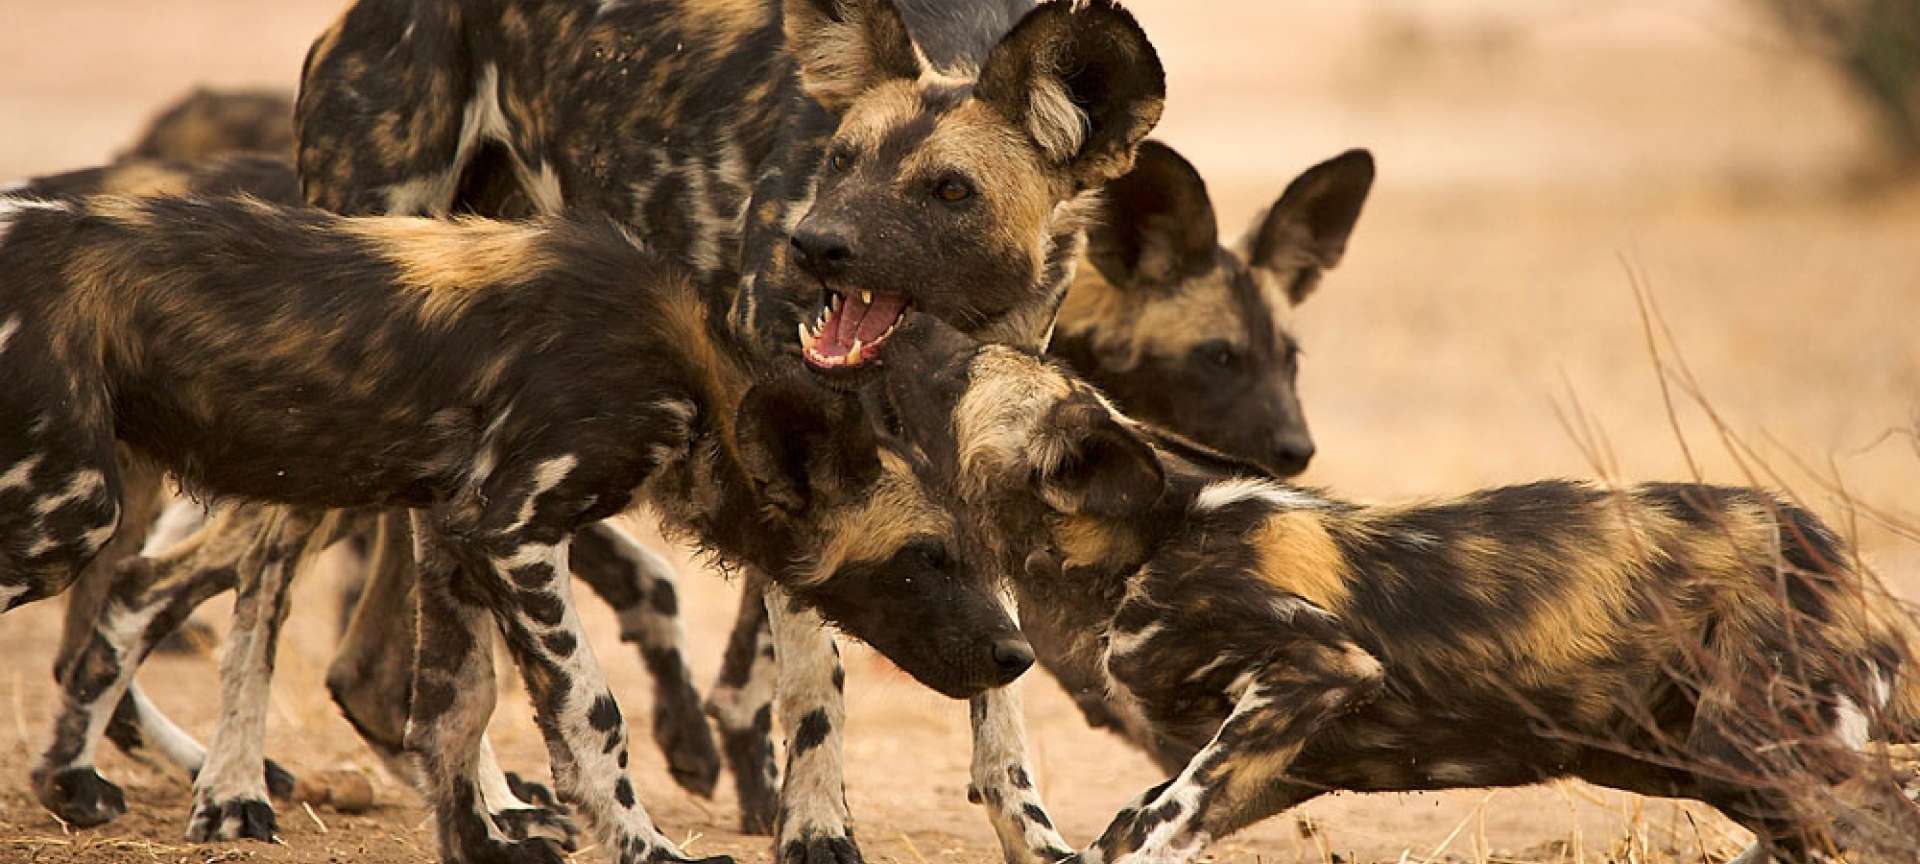 Wild dogs are highly endangered